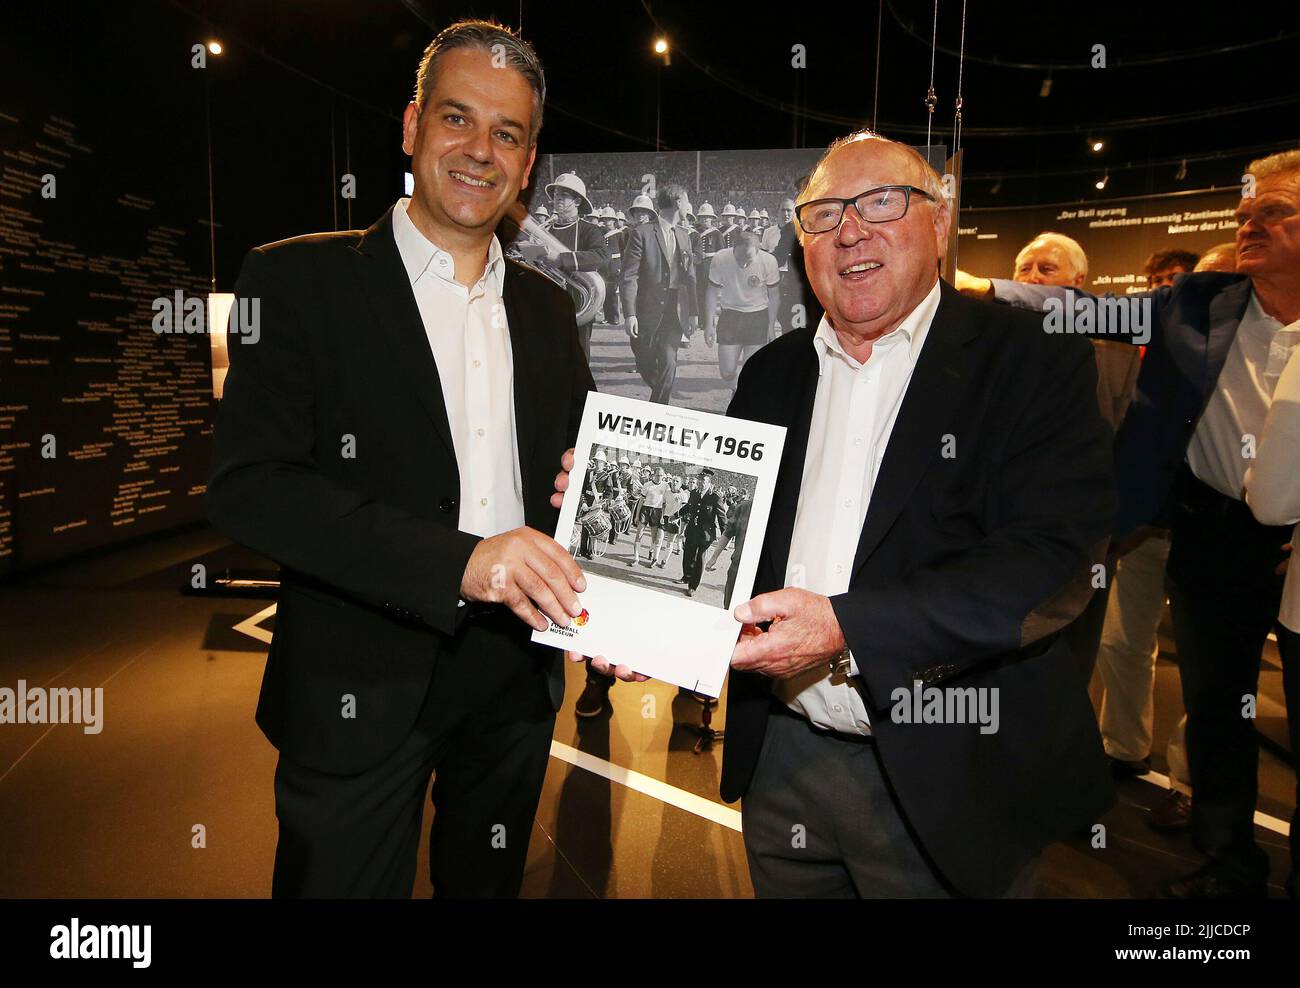 firo : 31.07.2016 football, season German Football Museum DFM honors 50 years World Cup 1966 Vice with a special exhibition Manuel Neukirchner, DFM with Uwe Seeler The final of the 8th Football World Cup 1966 between England and Germany (4:2 aet) has become a myth. The German Football Museum honors the unforgettable encounter with the legendary 'Wembley goal' on the anniversary with the special exhibition '50 years of Wembley - The myth in snapshots' (July 31, 2016 - January 15, 2017). Artistic media installations and some previously unpublished photographs will be on display. Stock Photo